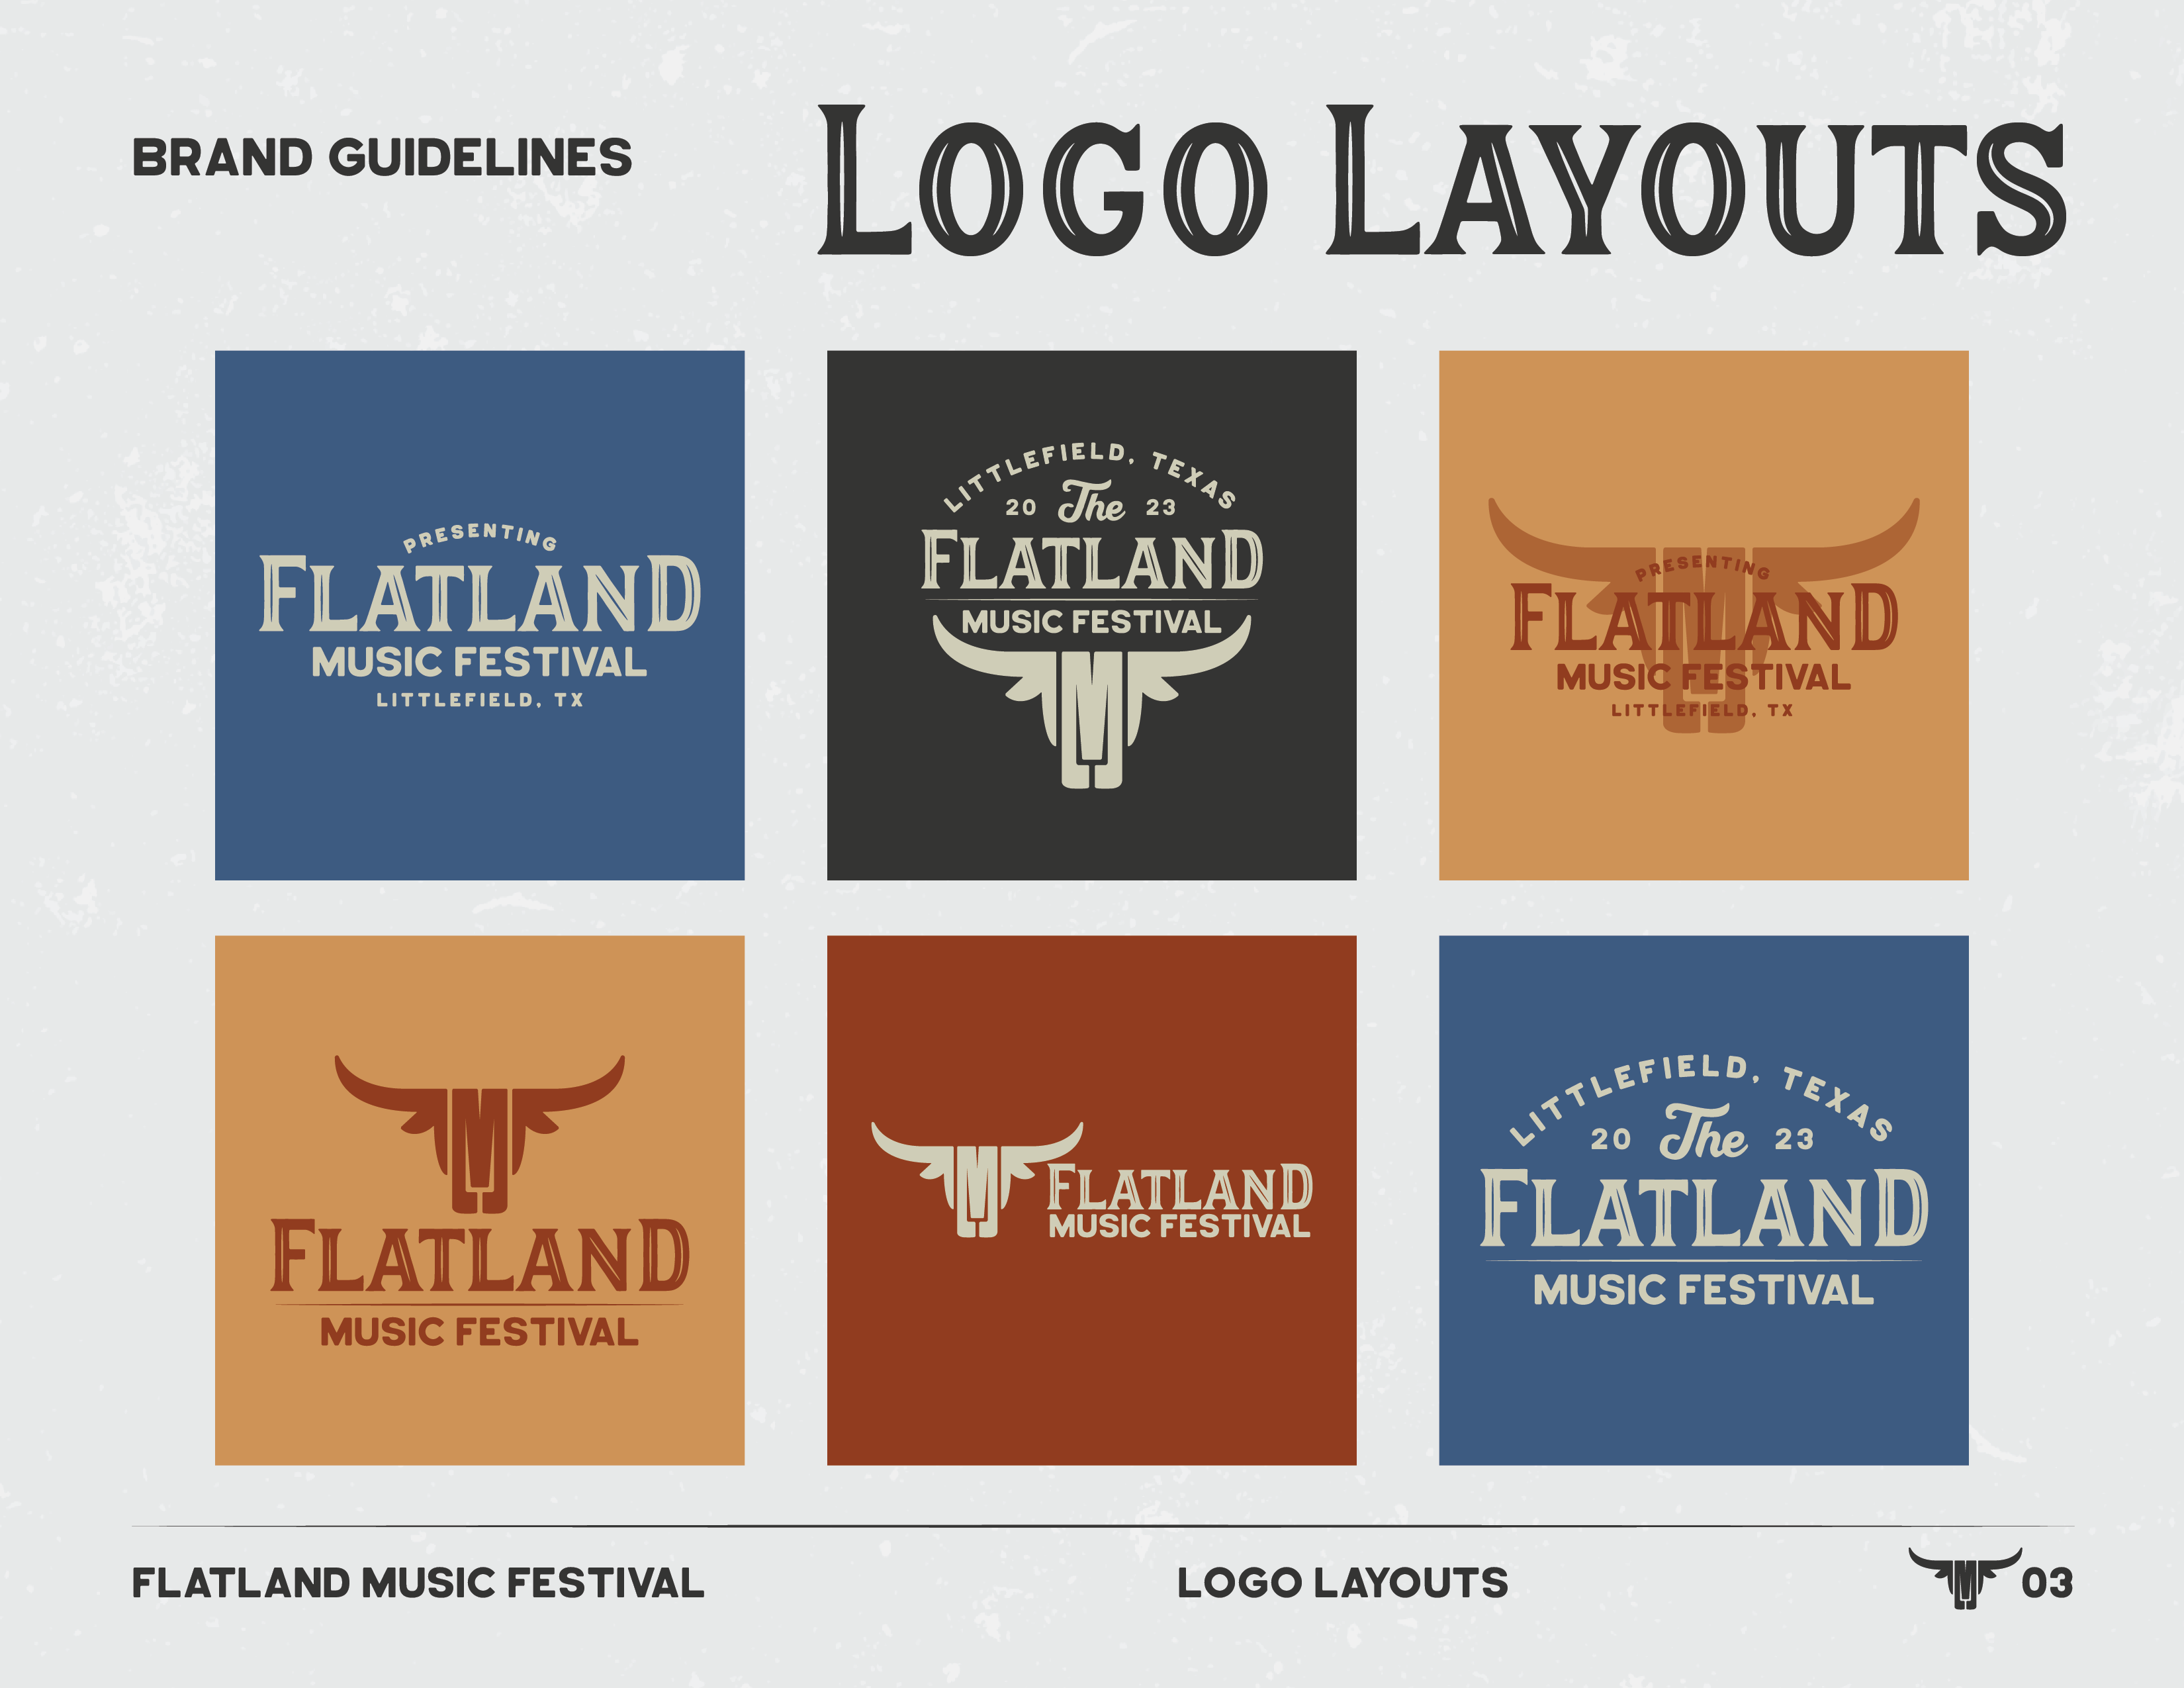 Flatland Music Festival Logo Layouts Brand Guideline created by the graphic design studio, Cre8tive